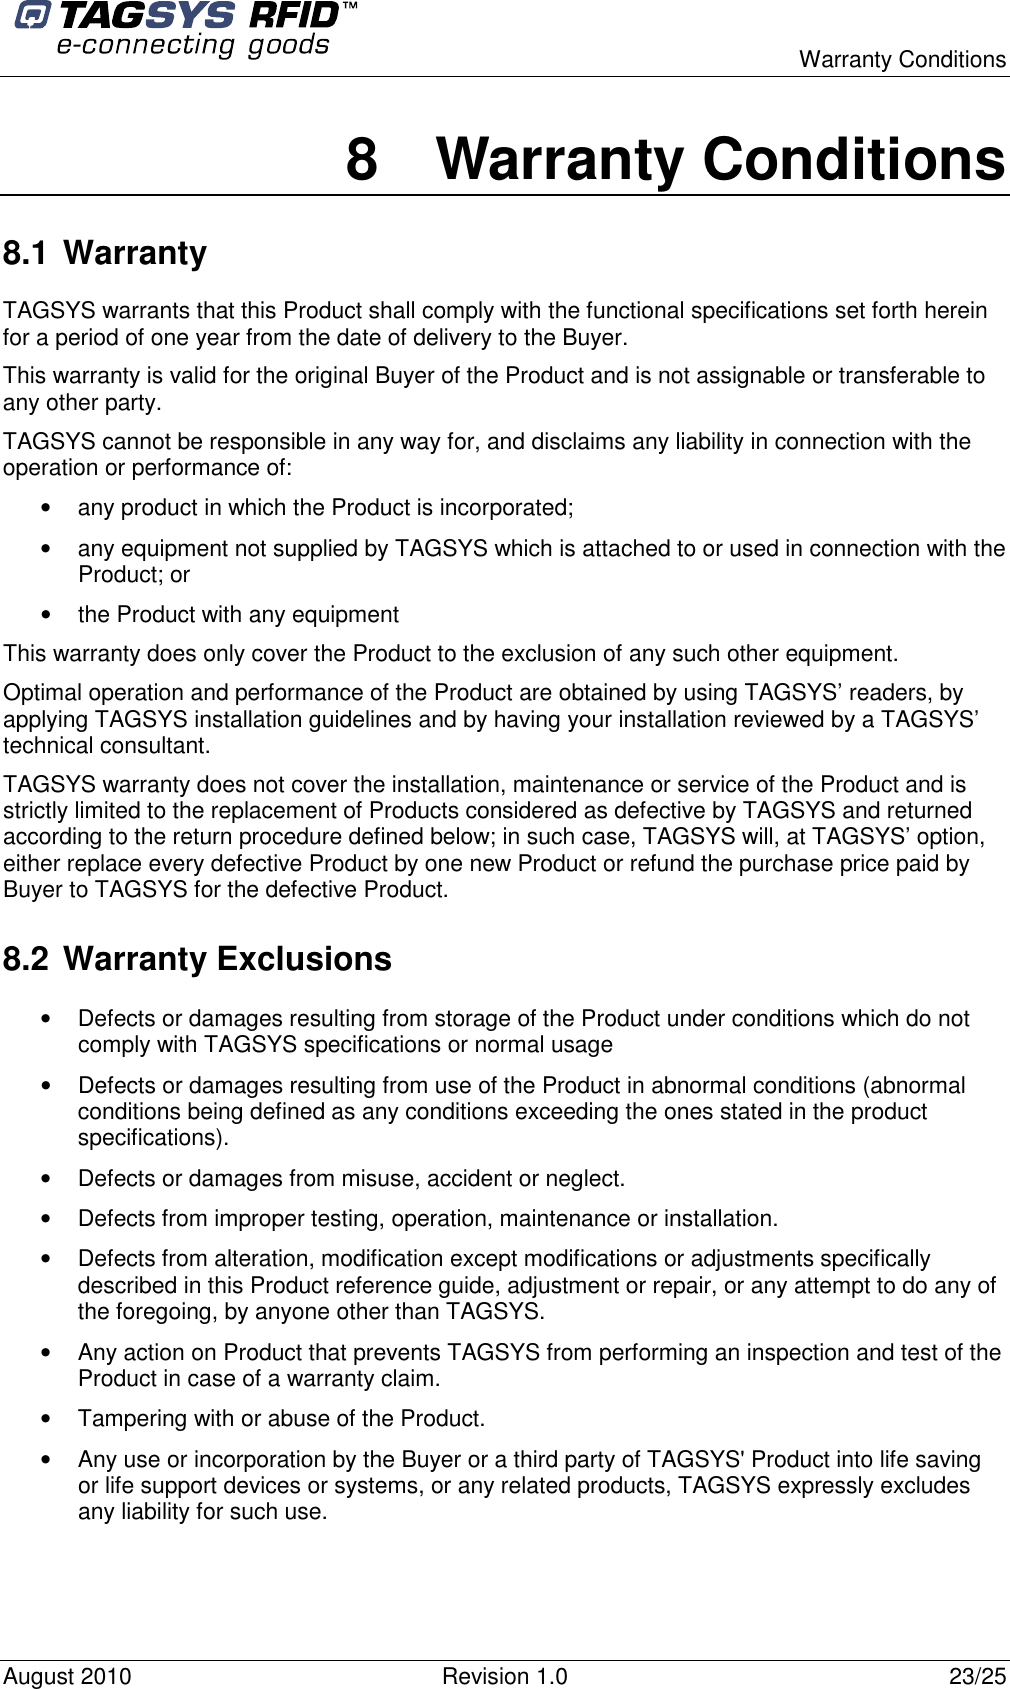  Warranty Conditions August 2010  Revision 1.0  23/25 8  Warranty Conditions 8.1 Warranty TAGSYS warrants that this Product shall comply with the functional specifications set forth herein for a period of one year from the date of delivery to the Buyer. This warranty is valid for the original Buyer of the Product and is not assignable or transferable to any other party. TAGSYS cannot be responsible in any way for, and disclaims any liability in connection with the operation or performance of: •  any product in which the Product is incorporated; •  any equipment not supplied by TAGSYS which is attached to or used in connection with the Product; or •  the Product with any equipment This warranty does only cover the Product to the exclusion of any such other equipment. Optimal operation and performance of the Product are obtained by using TAGSYS’ readers, by applying TAGSYS installation guidelines and by having your installation reviewed by a TAGSYS’ technical consultant. TAGSYS warranty does not cover the installation, maintenance or service of the Product and is strictly limited to the replacement of Products considered as defective by TAGSYS and returned according to the return procedure defined below; in such case, TAGSYS will, at TAGSYS’ option, either replace every defective Product by one new Product or refund the purchase price paid by Buyer to TAGSYS for the defective Product. 8.2 Warranty Exclusions •  Defects or damages resulting from storage of the Product under conditions which do not comply with TAGSYS specifications or normal usage •  Defects or damages resulting from use of the Product in abnormal conditions (abnormal conditions being defined as any conditions exceeding the ones stated in the product specifications). •  Defects or damages from misuse, accident or neglect. •  Defects from improper testing, operation, maintenance or installation. •  Defects from alteration, modification except modifications or adjustments specifically described in this Product reference guide, adjustment or repair, or any attempt to do any of the foregoing, by anyone other than TAGSYS. •  Any action on Product that prevents TAGSYS from performing an inspection and test of the Product in case of a warranty claim. •  Tampering with or abuse of the Product. •  Any use or incorporation by the Buyer or a third party of TAGSYS&apos; Product into life saving or life support devices or systems, or any related products, TAGSYS expressly excludes any liability for such use. 